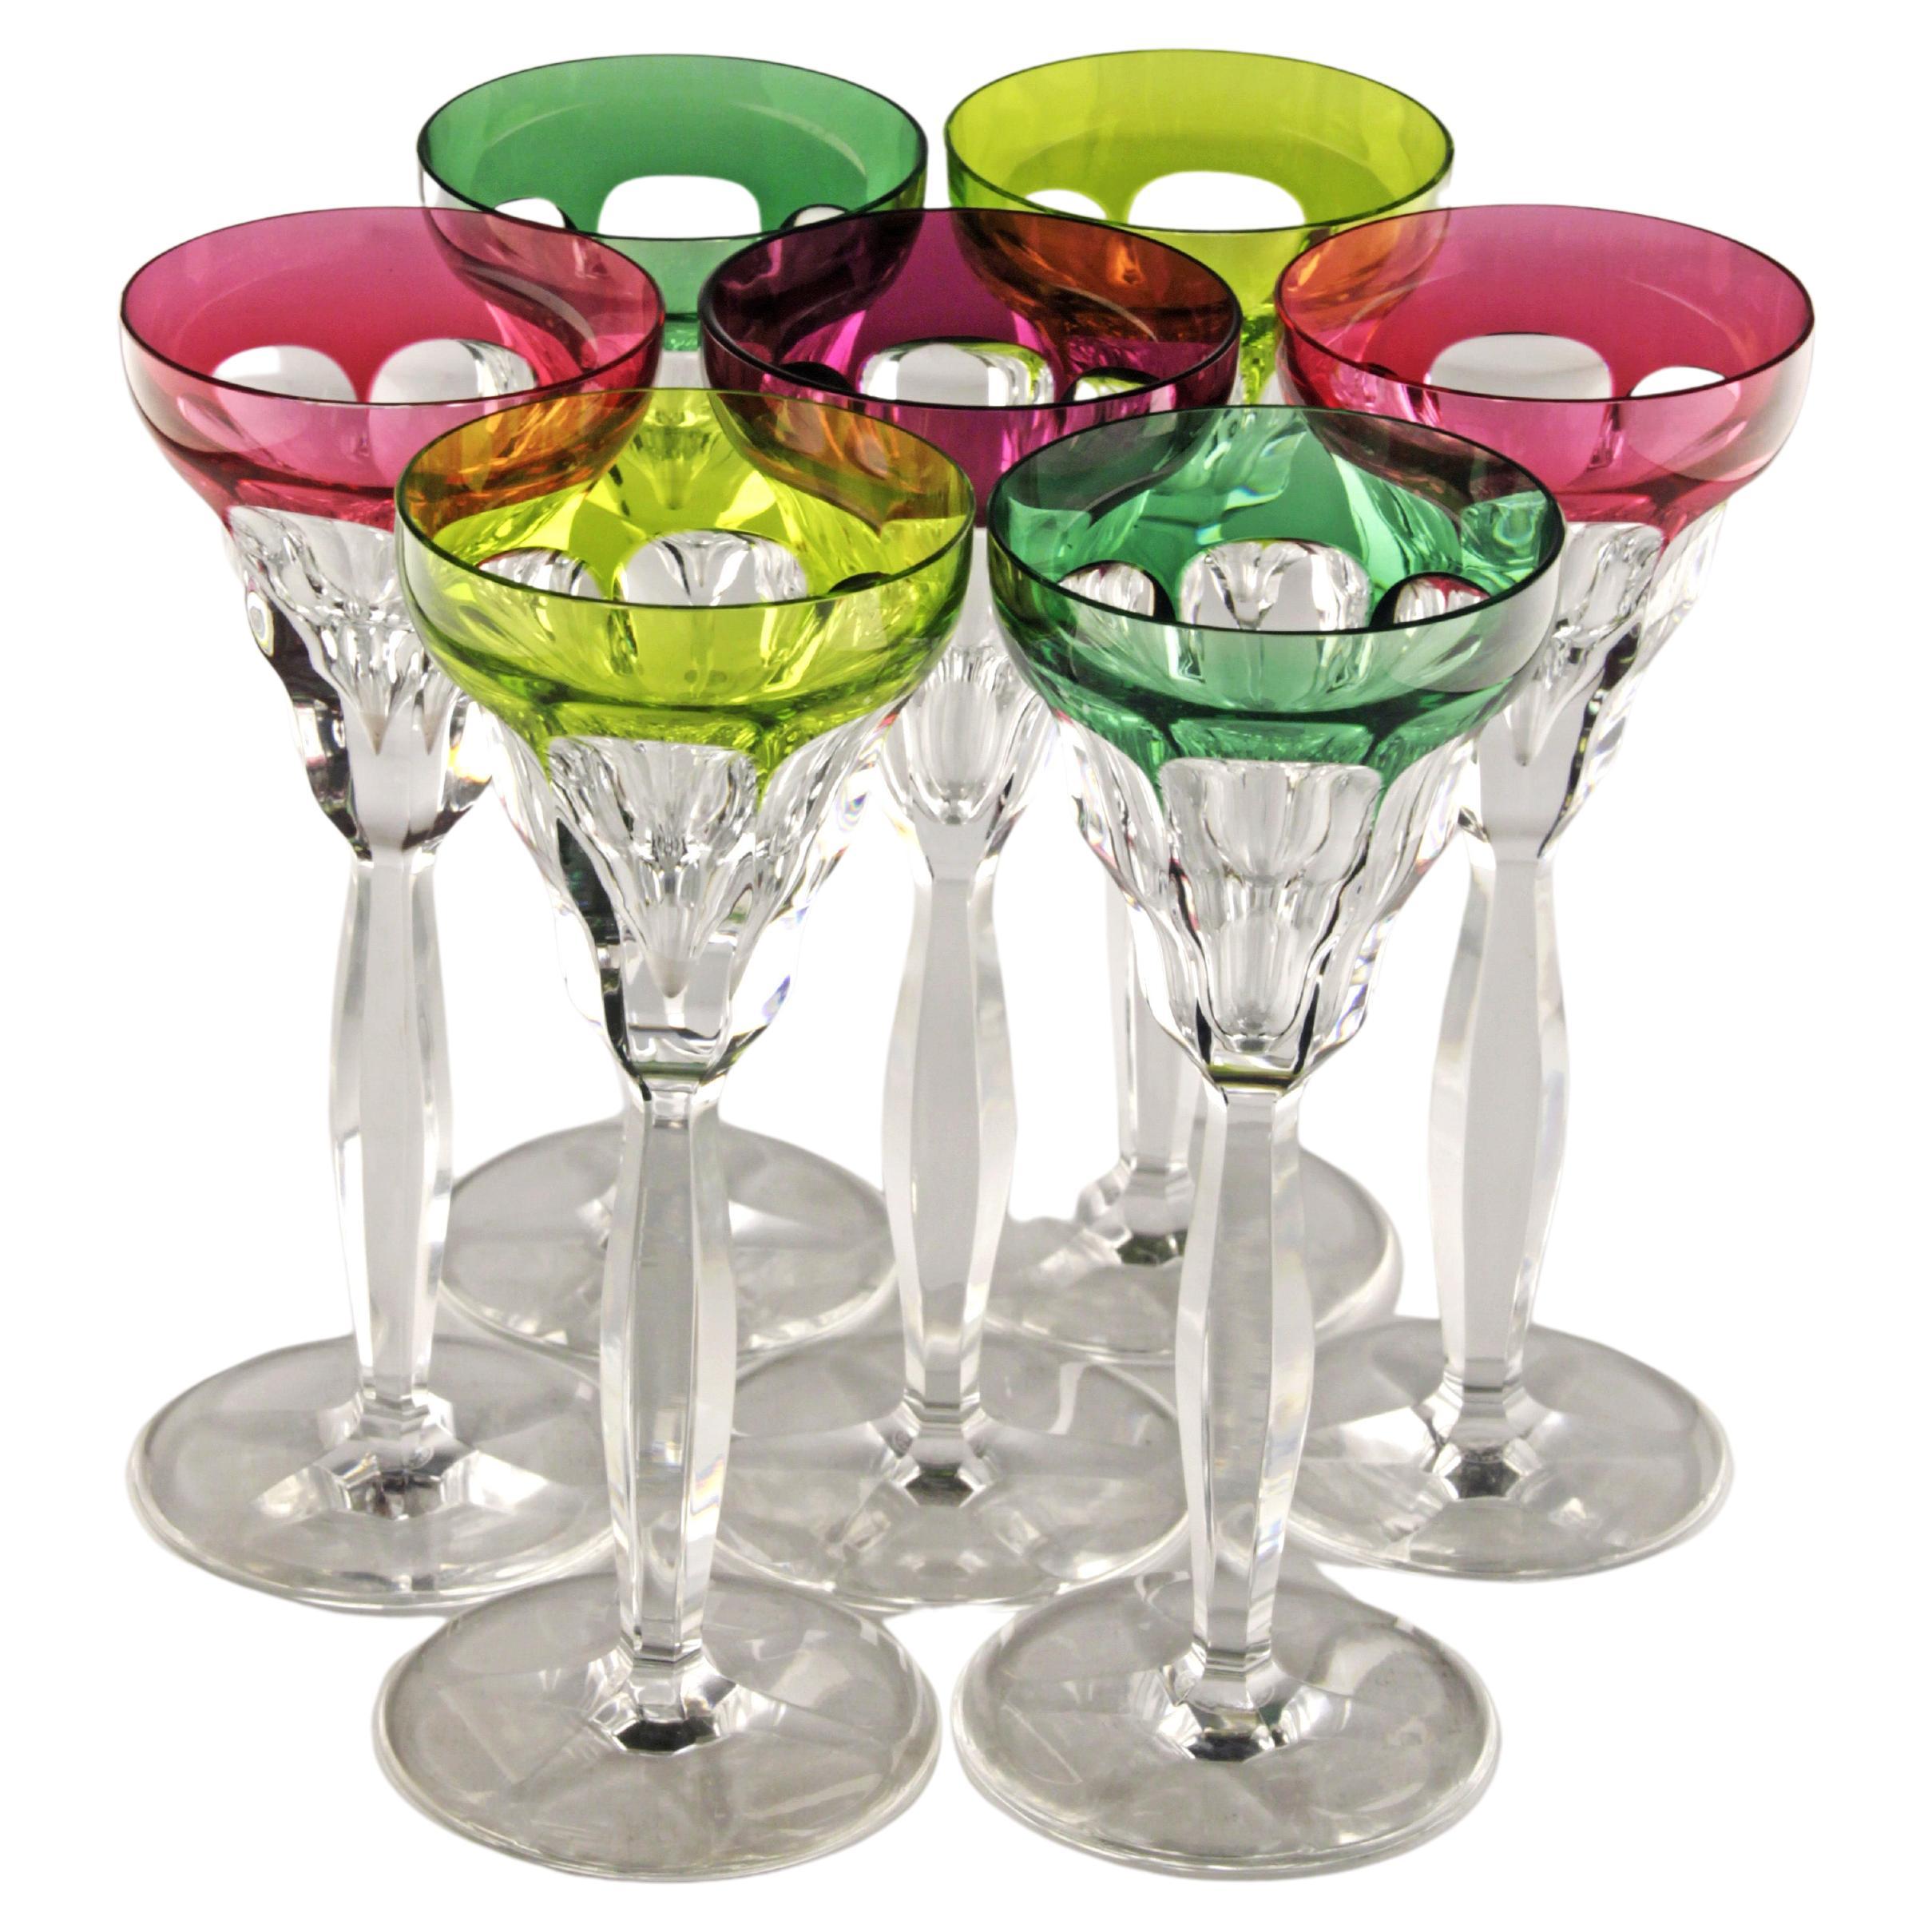 Art deco crystal baccarat glasses set
Set of 7 Baccarat wine glasses
perfect condition
Origin France Circa 1940
Cut glass. Baccarat stamped on its base
art deco style
The Société Baccarat is a company that produces high-quality crystal items. It is